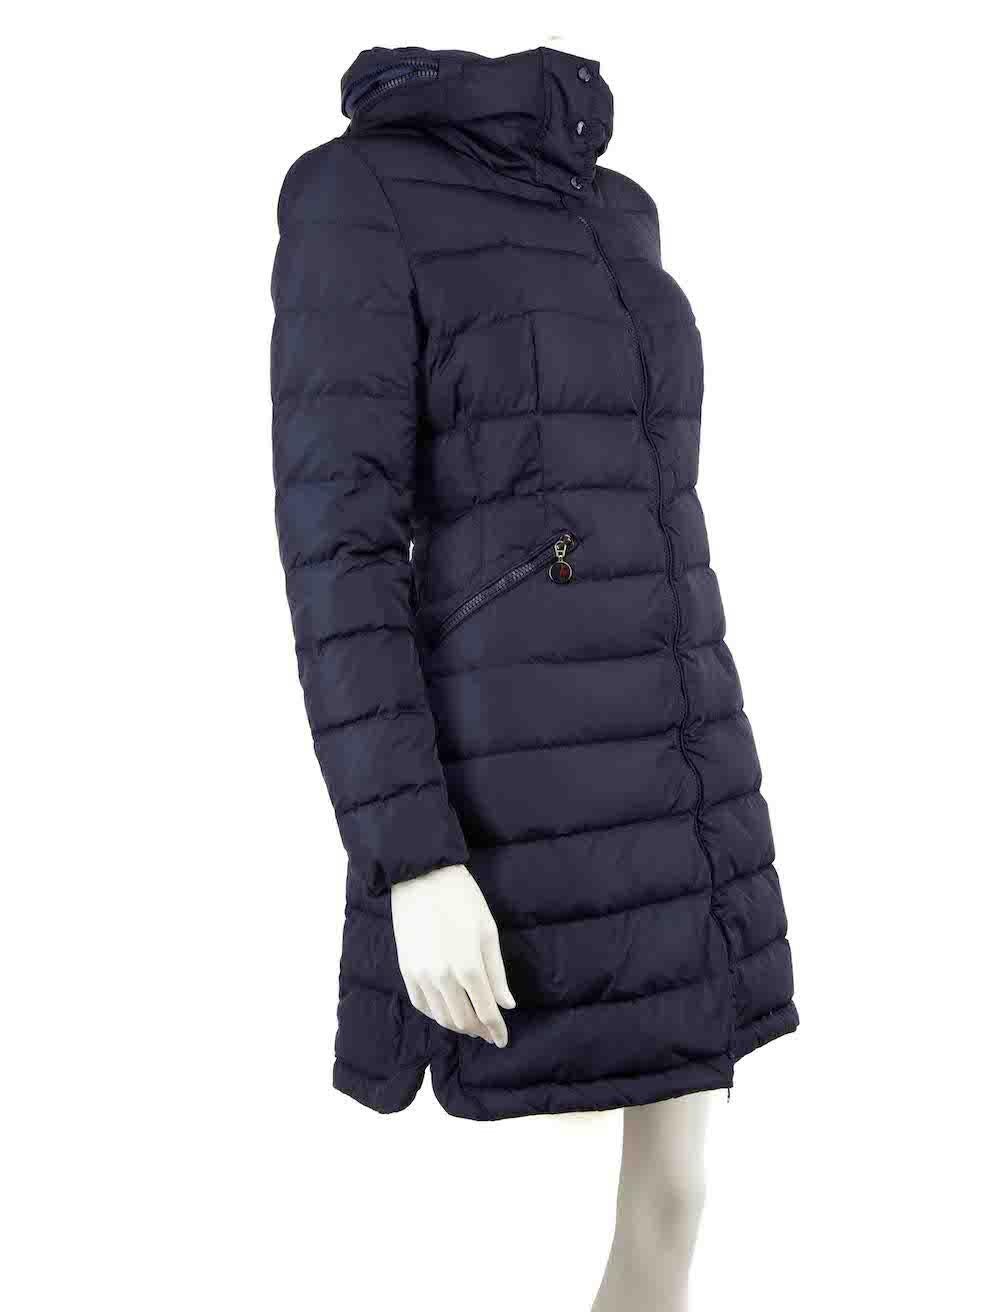 CONDITION is Very good. Minimal wear to coat is evident. Minimal wear to the left sleeve with a pluck to the stitching on this used Moncler designer resale item.
 
 Details
 Blue
 Synthetic
 Down coat
 Mid length
 Quilted
 Down feather filling
